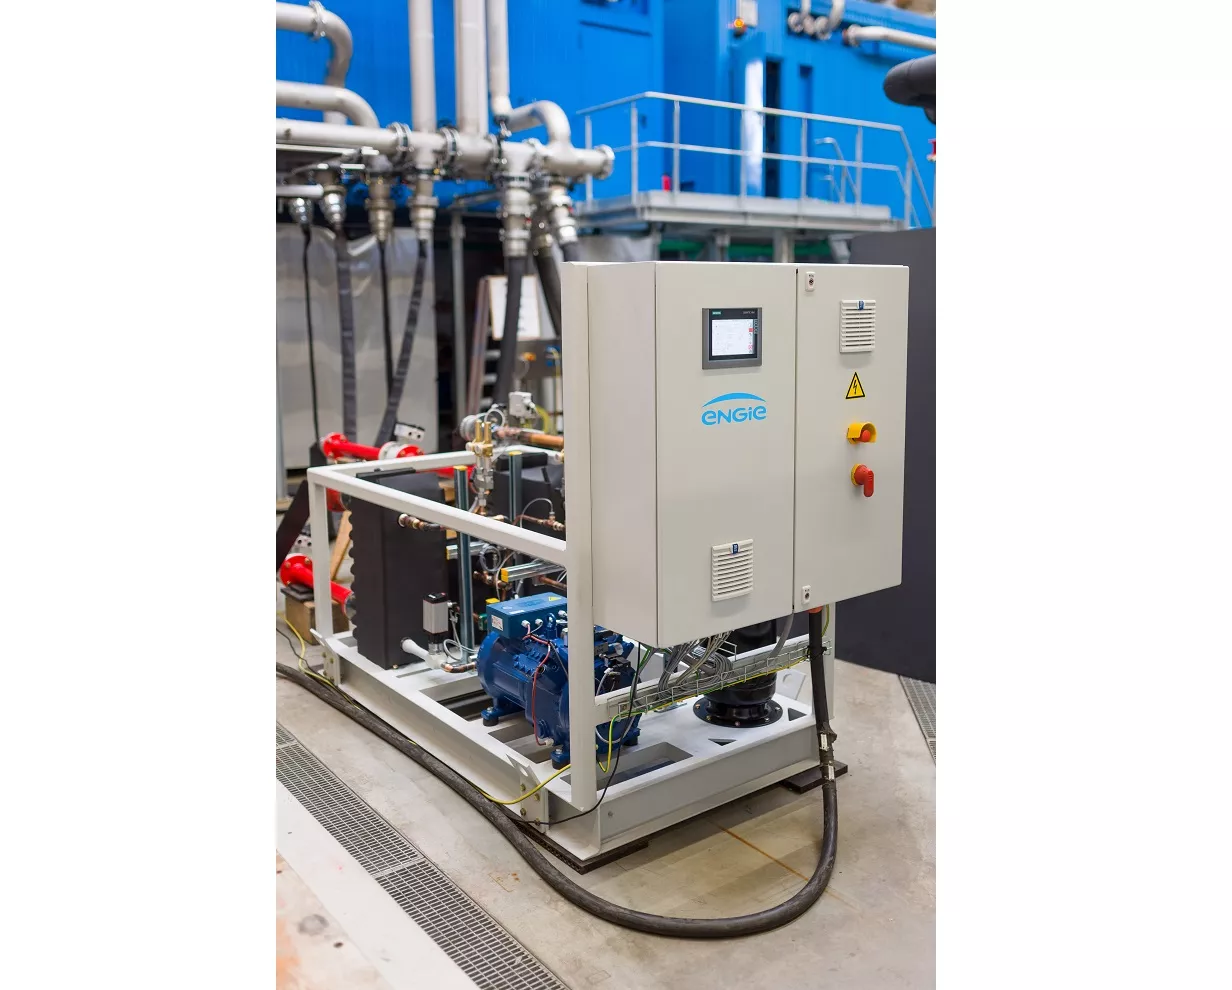 ENGIE Refrigeration equips thermeco2 high-temperature heat pump with new specifications